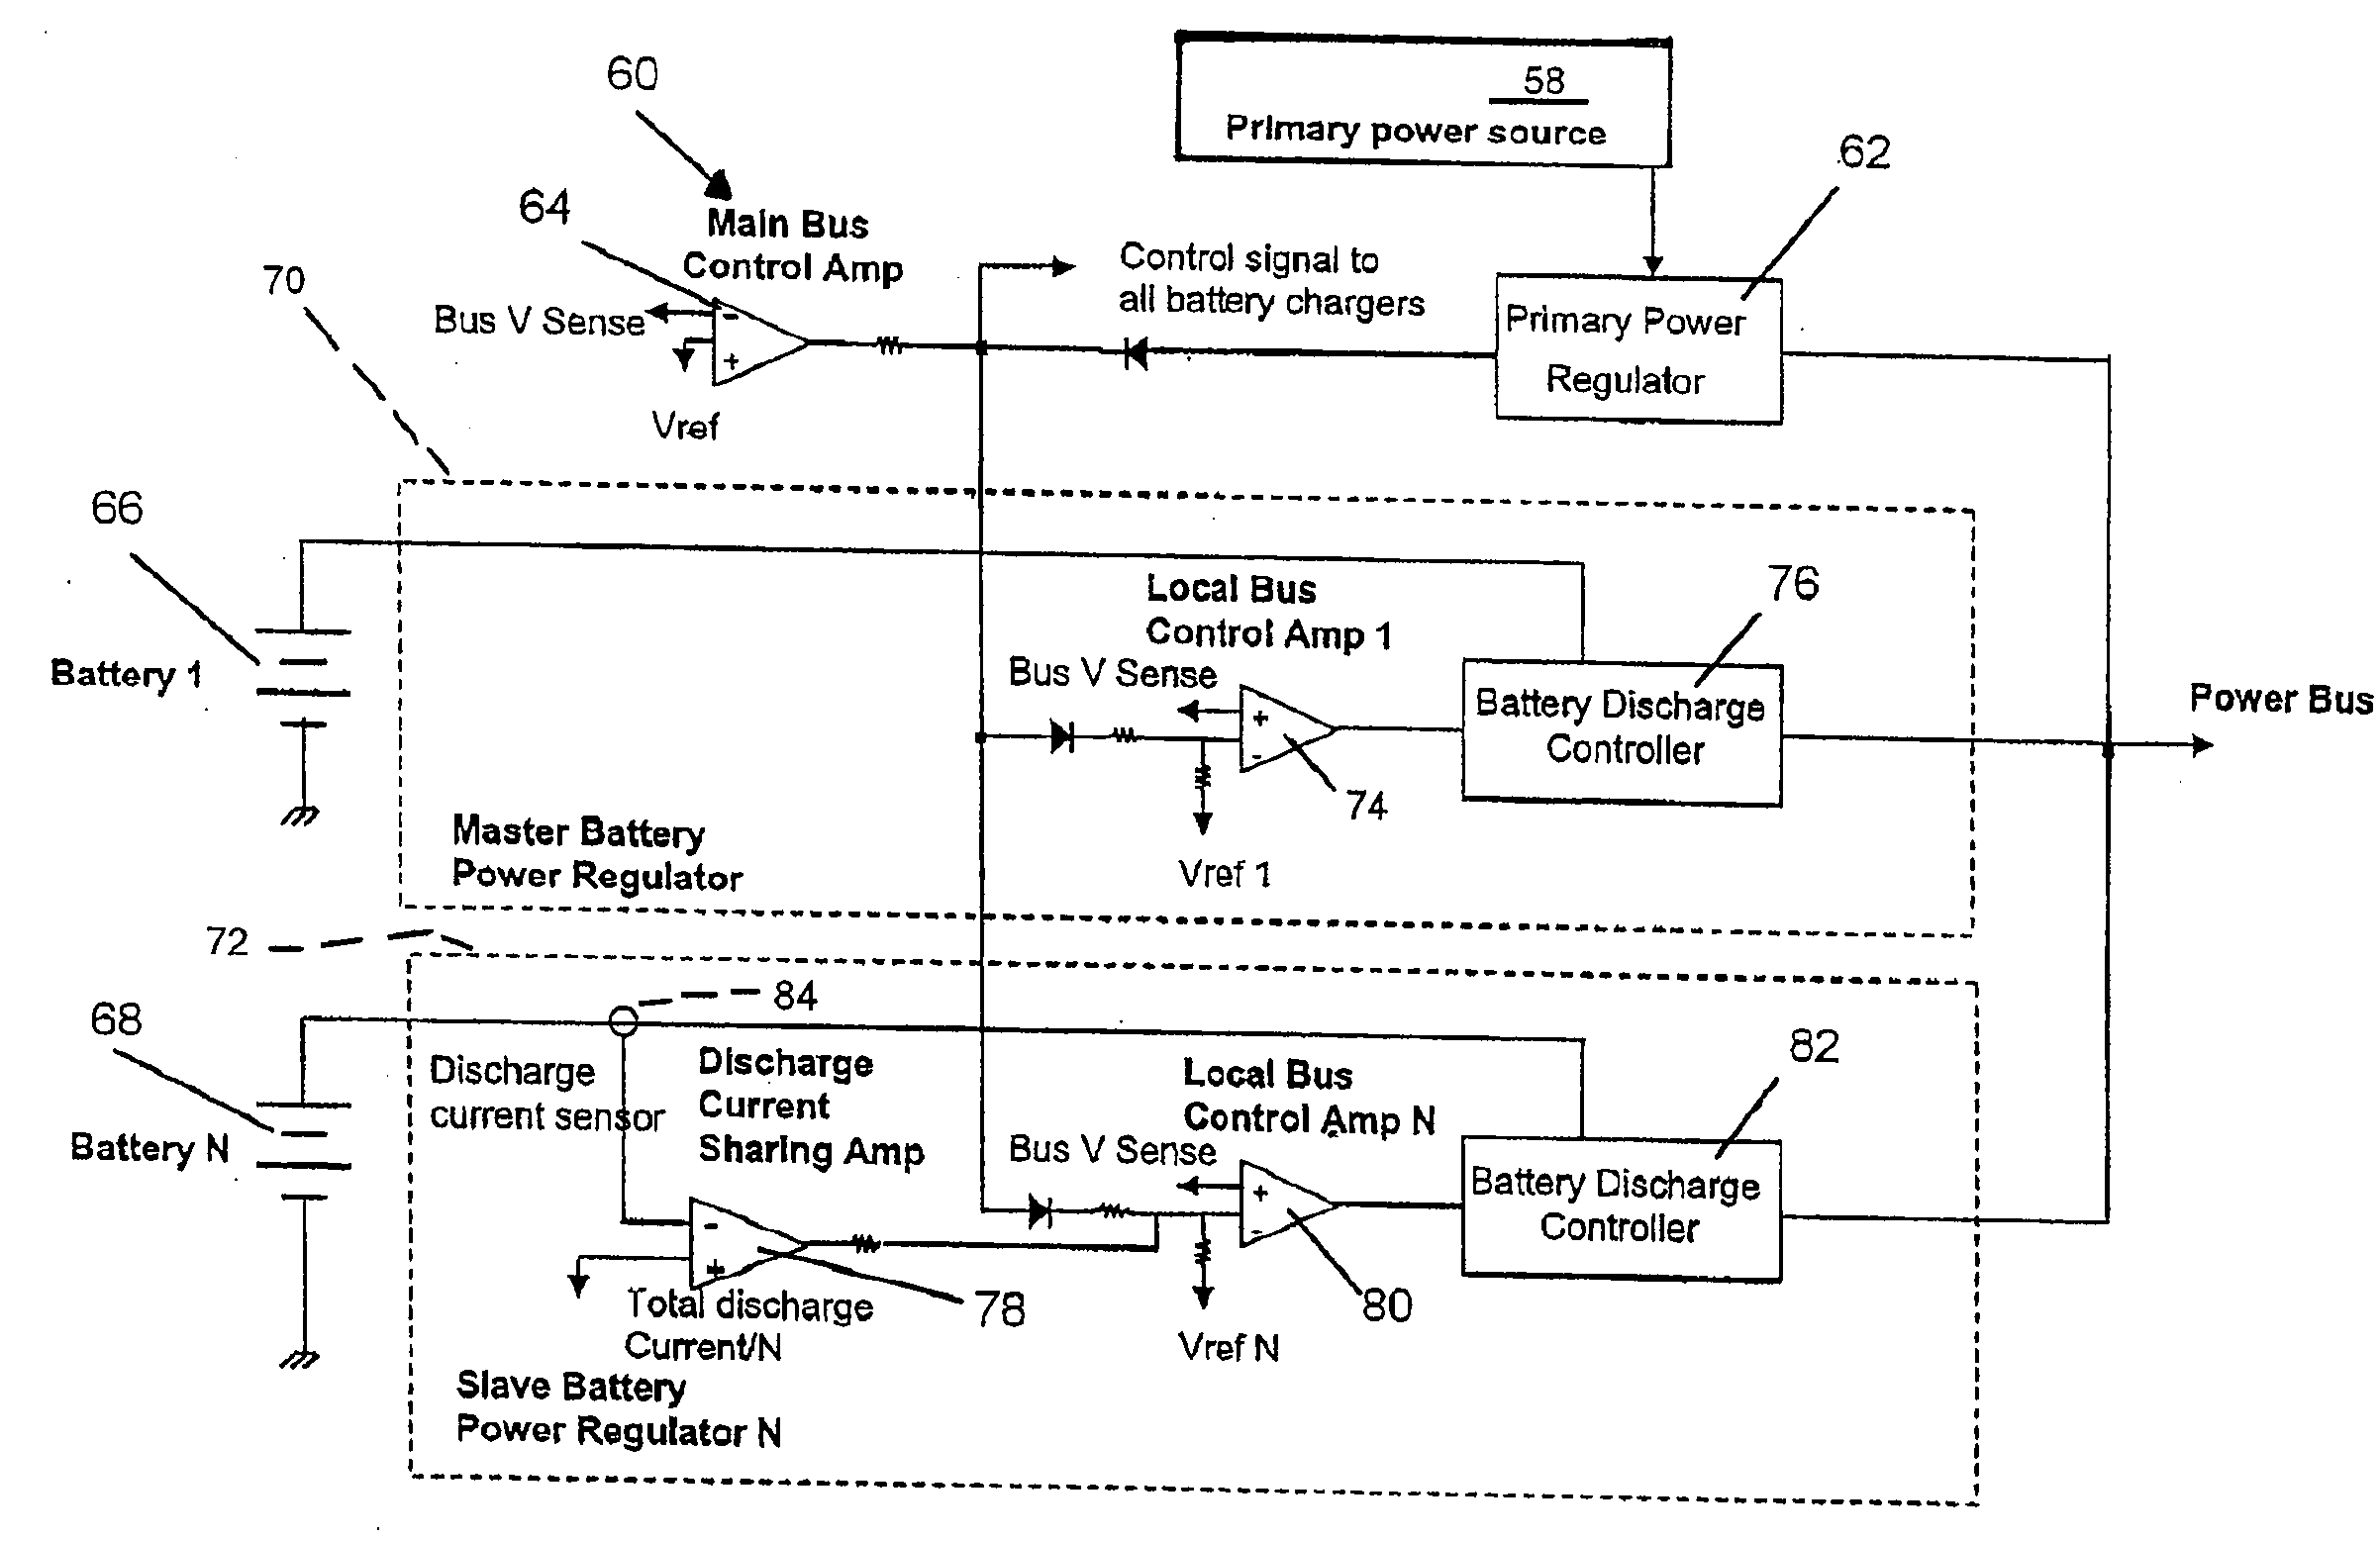 Battery discharge current sharing in a tightly regulated power system